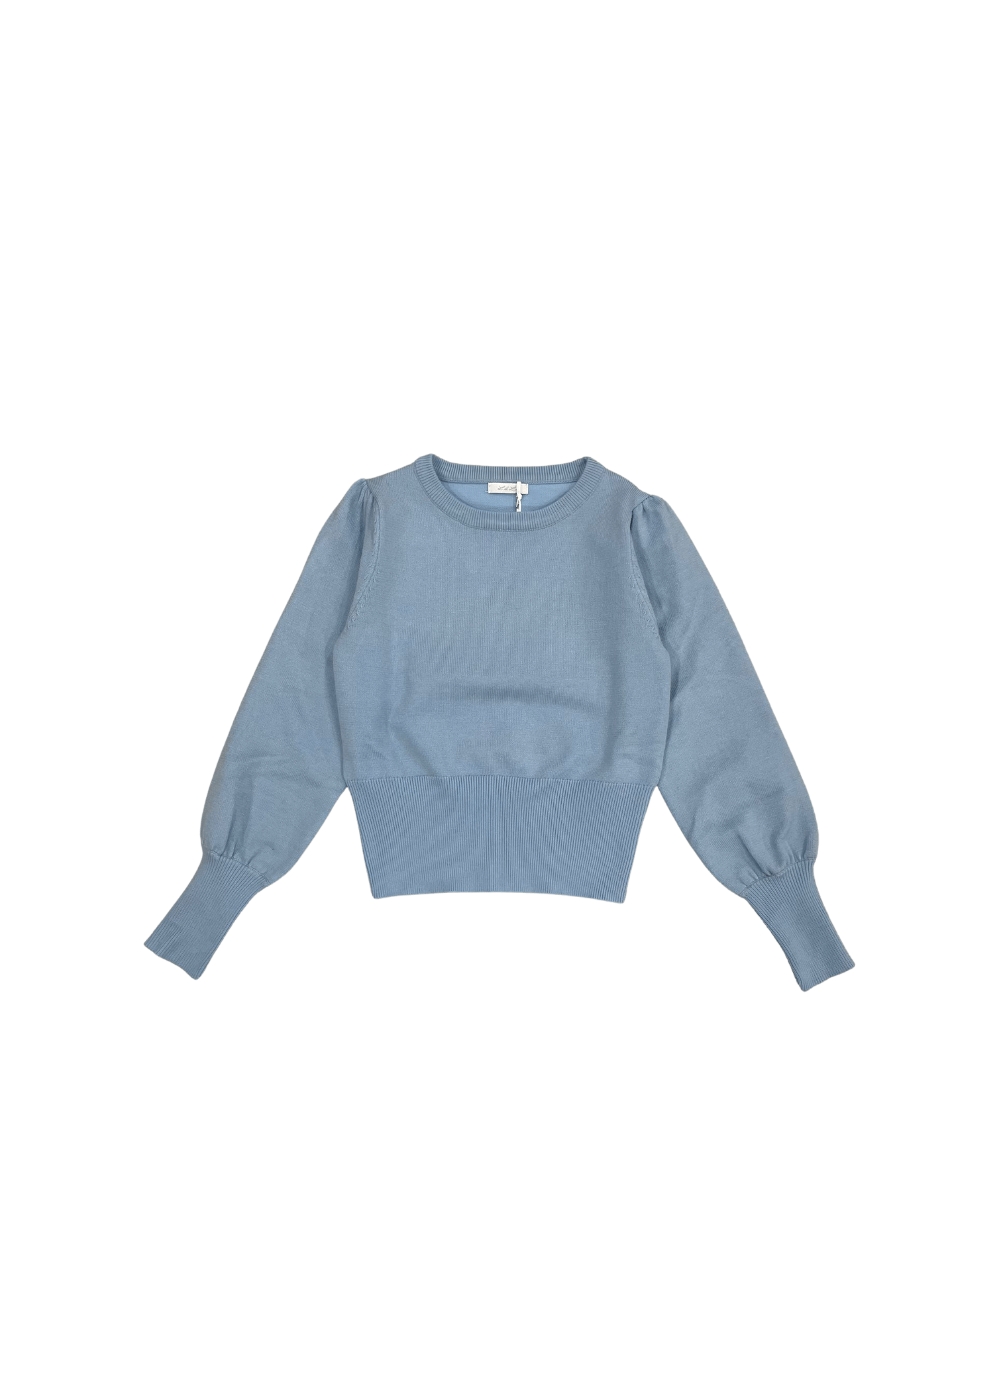 Featured image for “Lù Lù Pullover Avio”